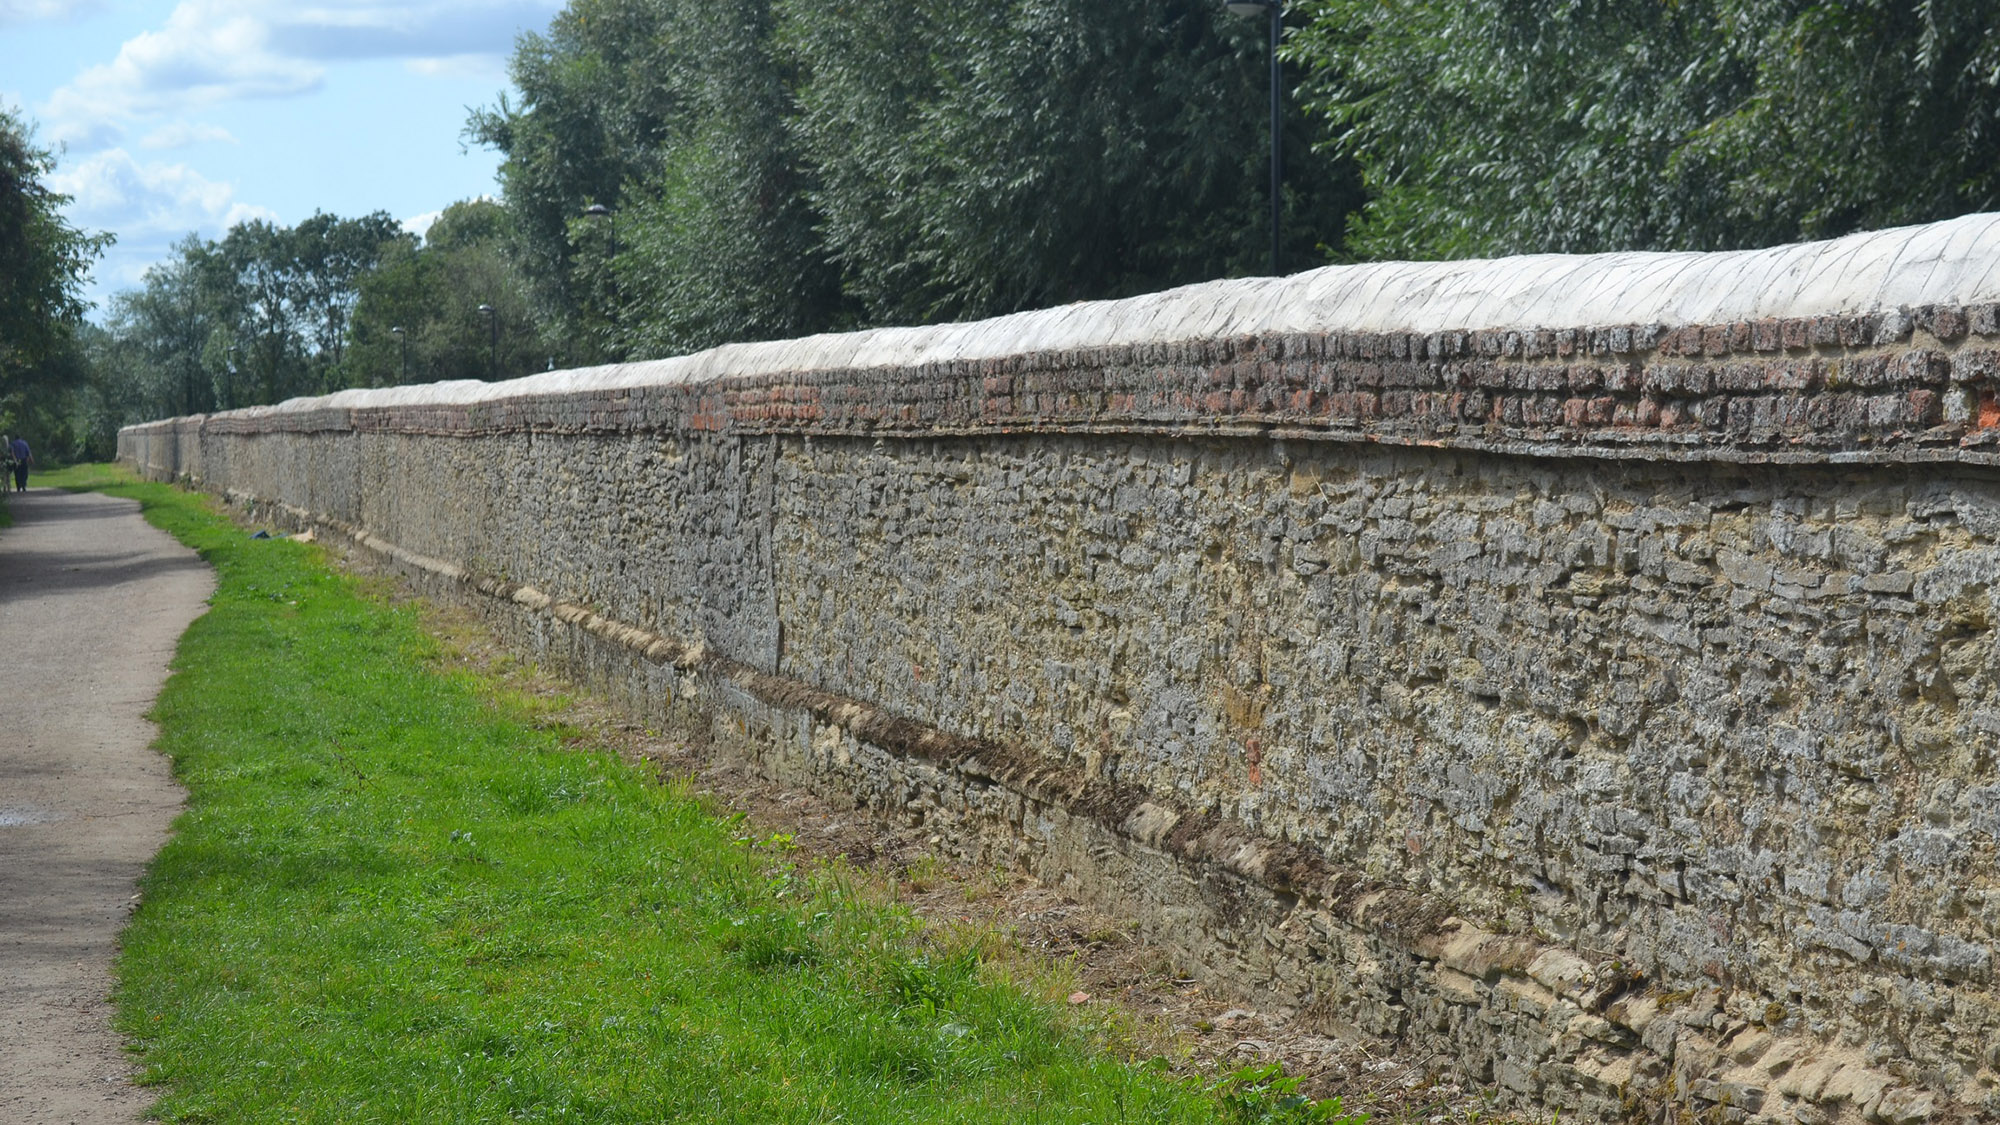 View along a wall next to a path with a grass verge